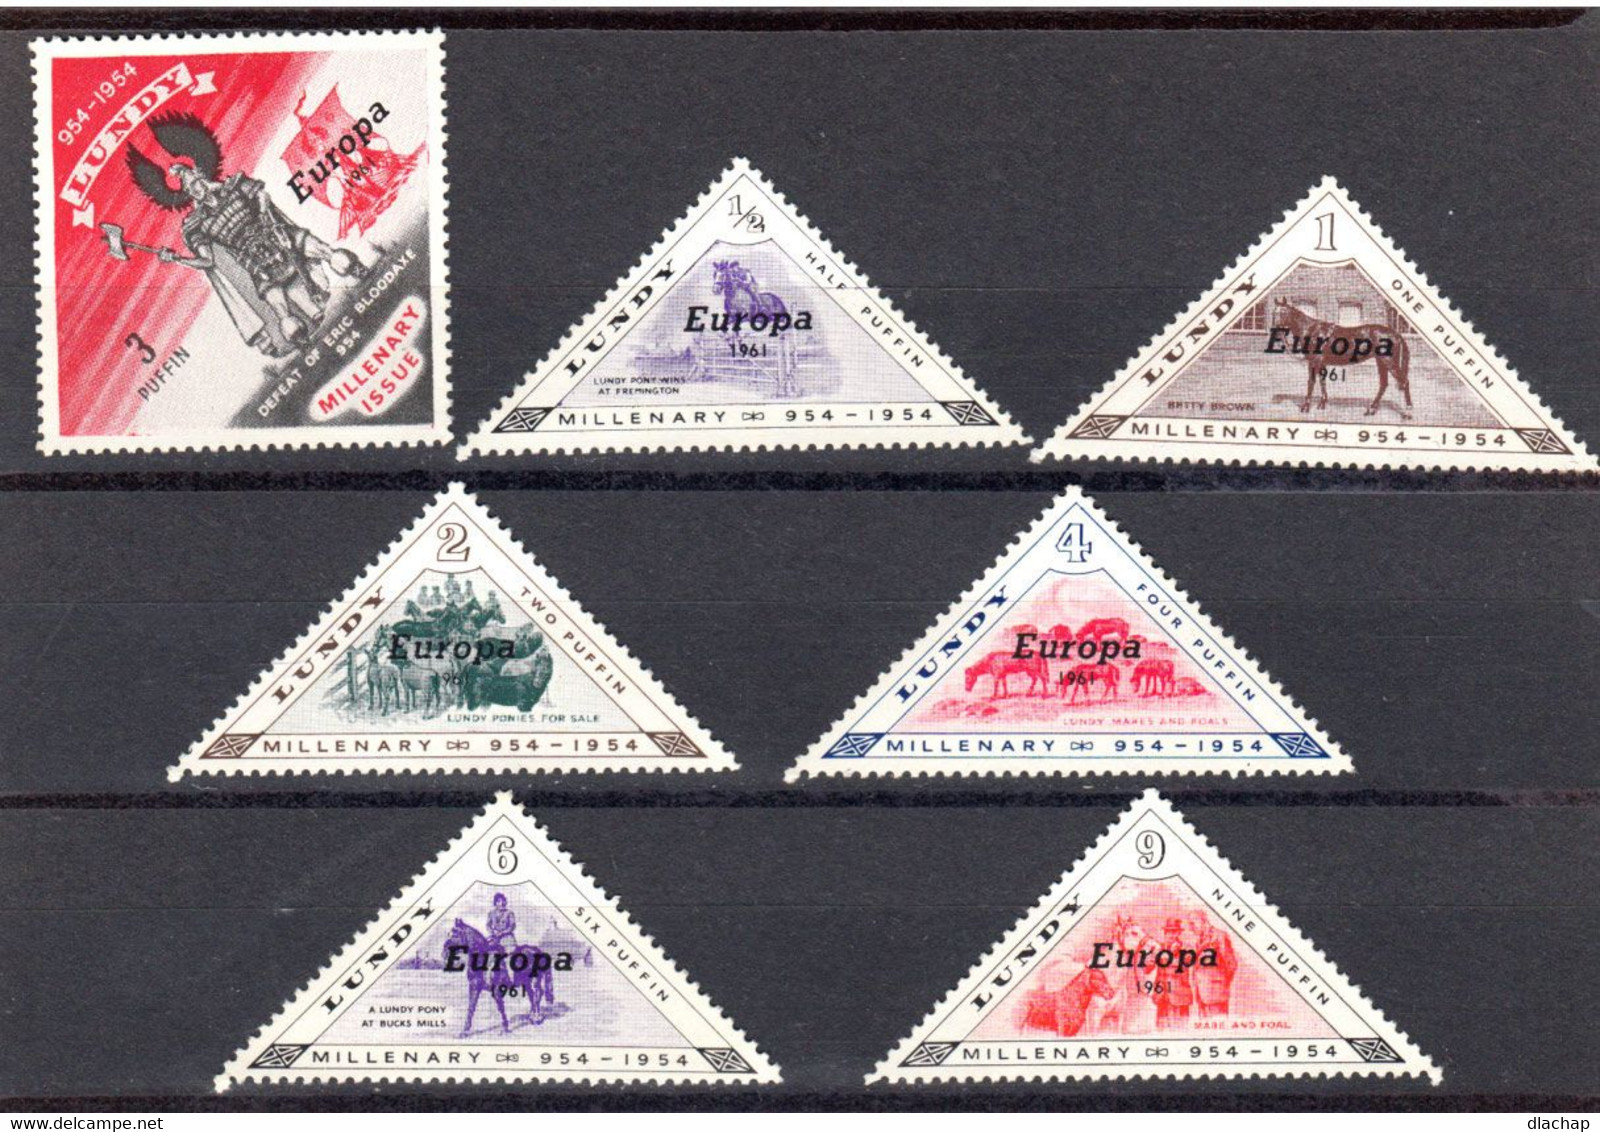 Lundy Serie Europa 1961Sept Timbres * Neufs Avec Charniere - Local Issues